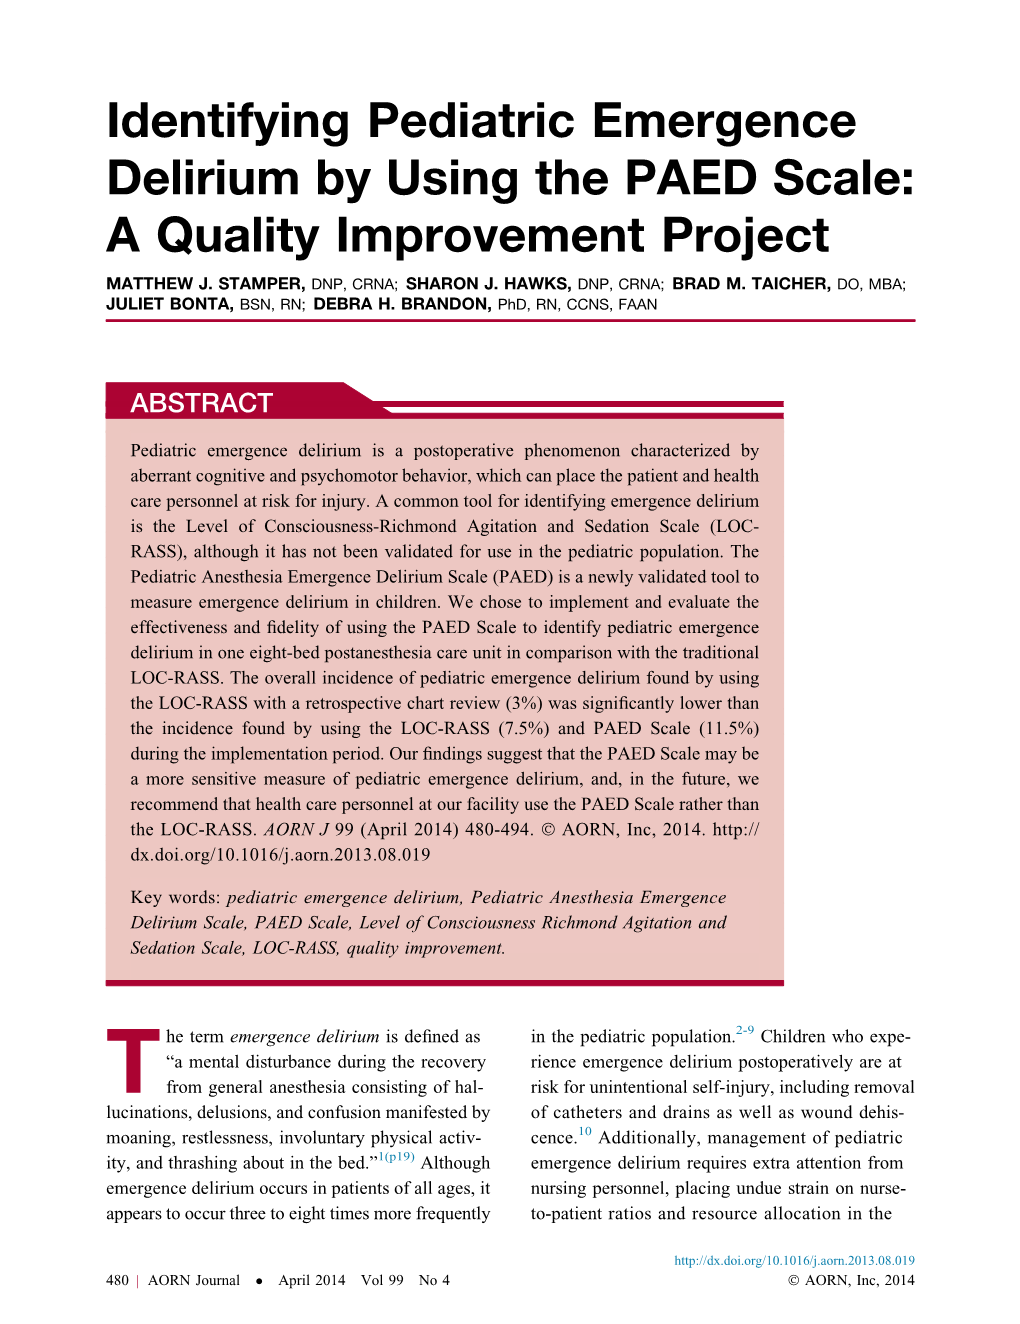 Identifying Pediatric Emergence Delirium by Using the PAED Scale: a Quality Improvement Project